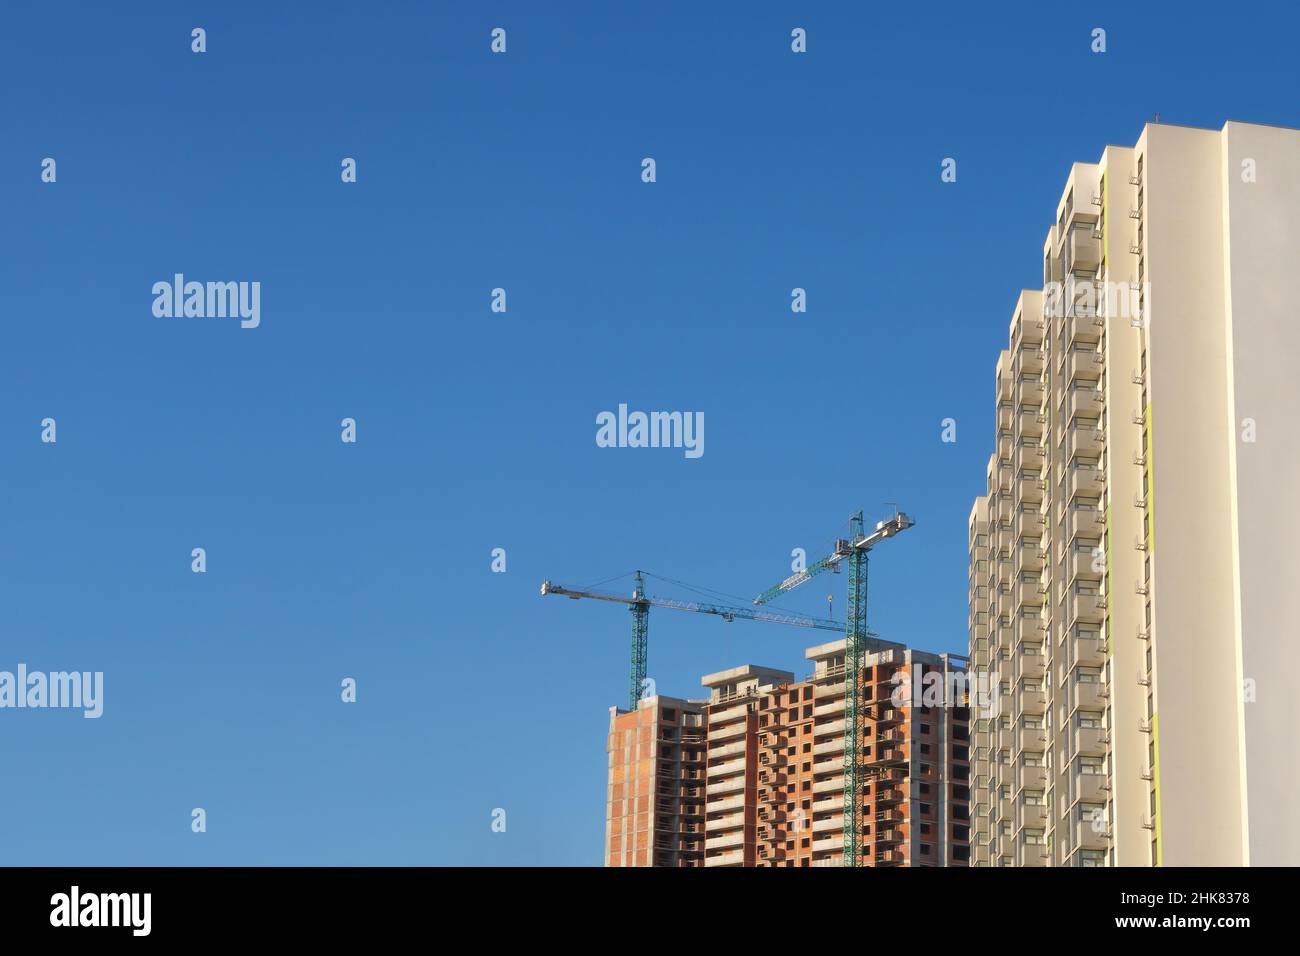 Multistory house. Tower cranes construction site building company property background real estate mortgage loan. Investment building apartments Stock Photo